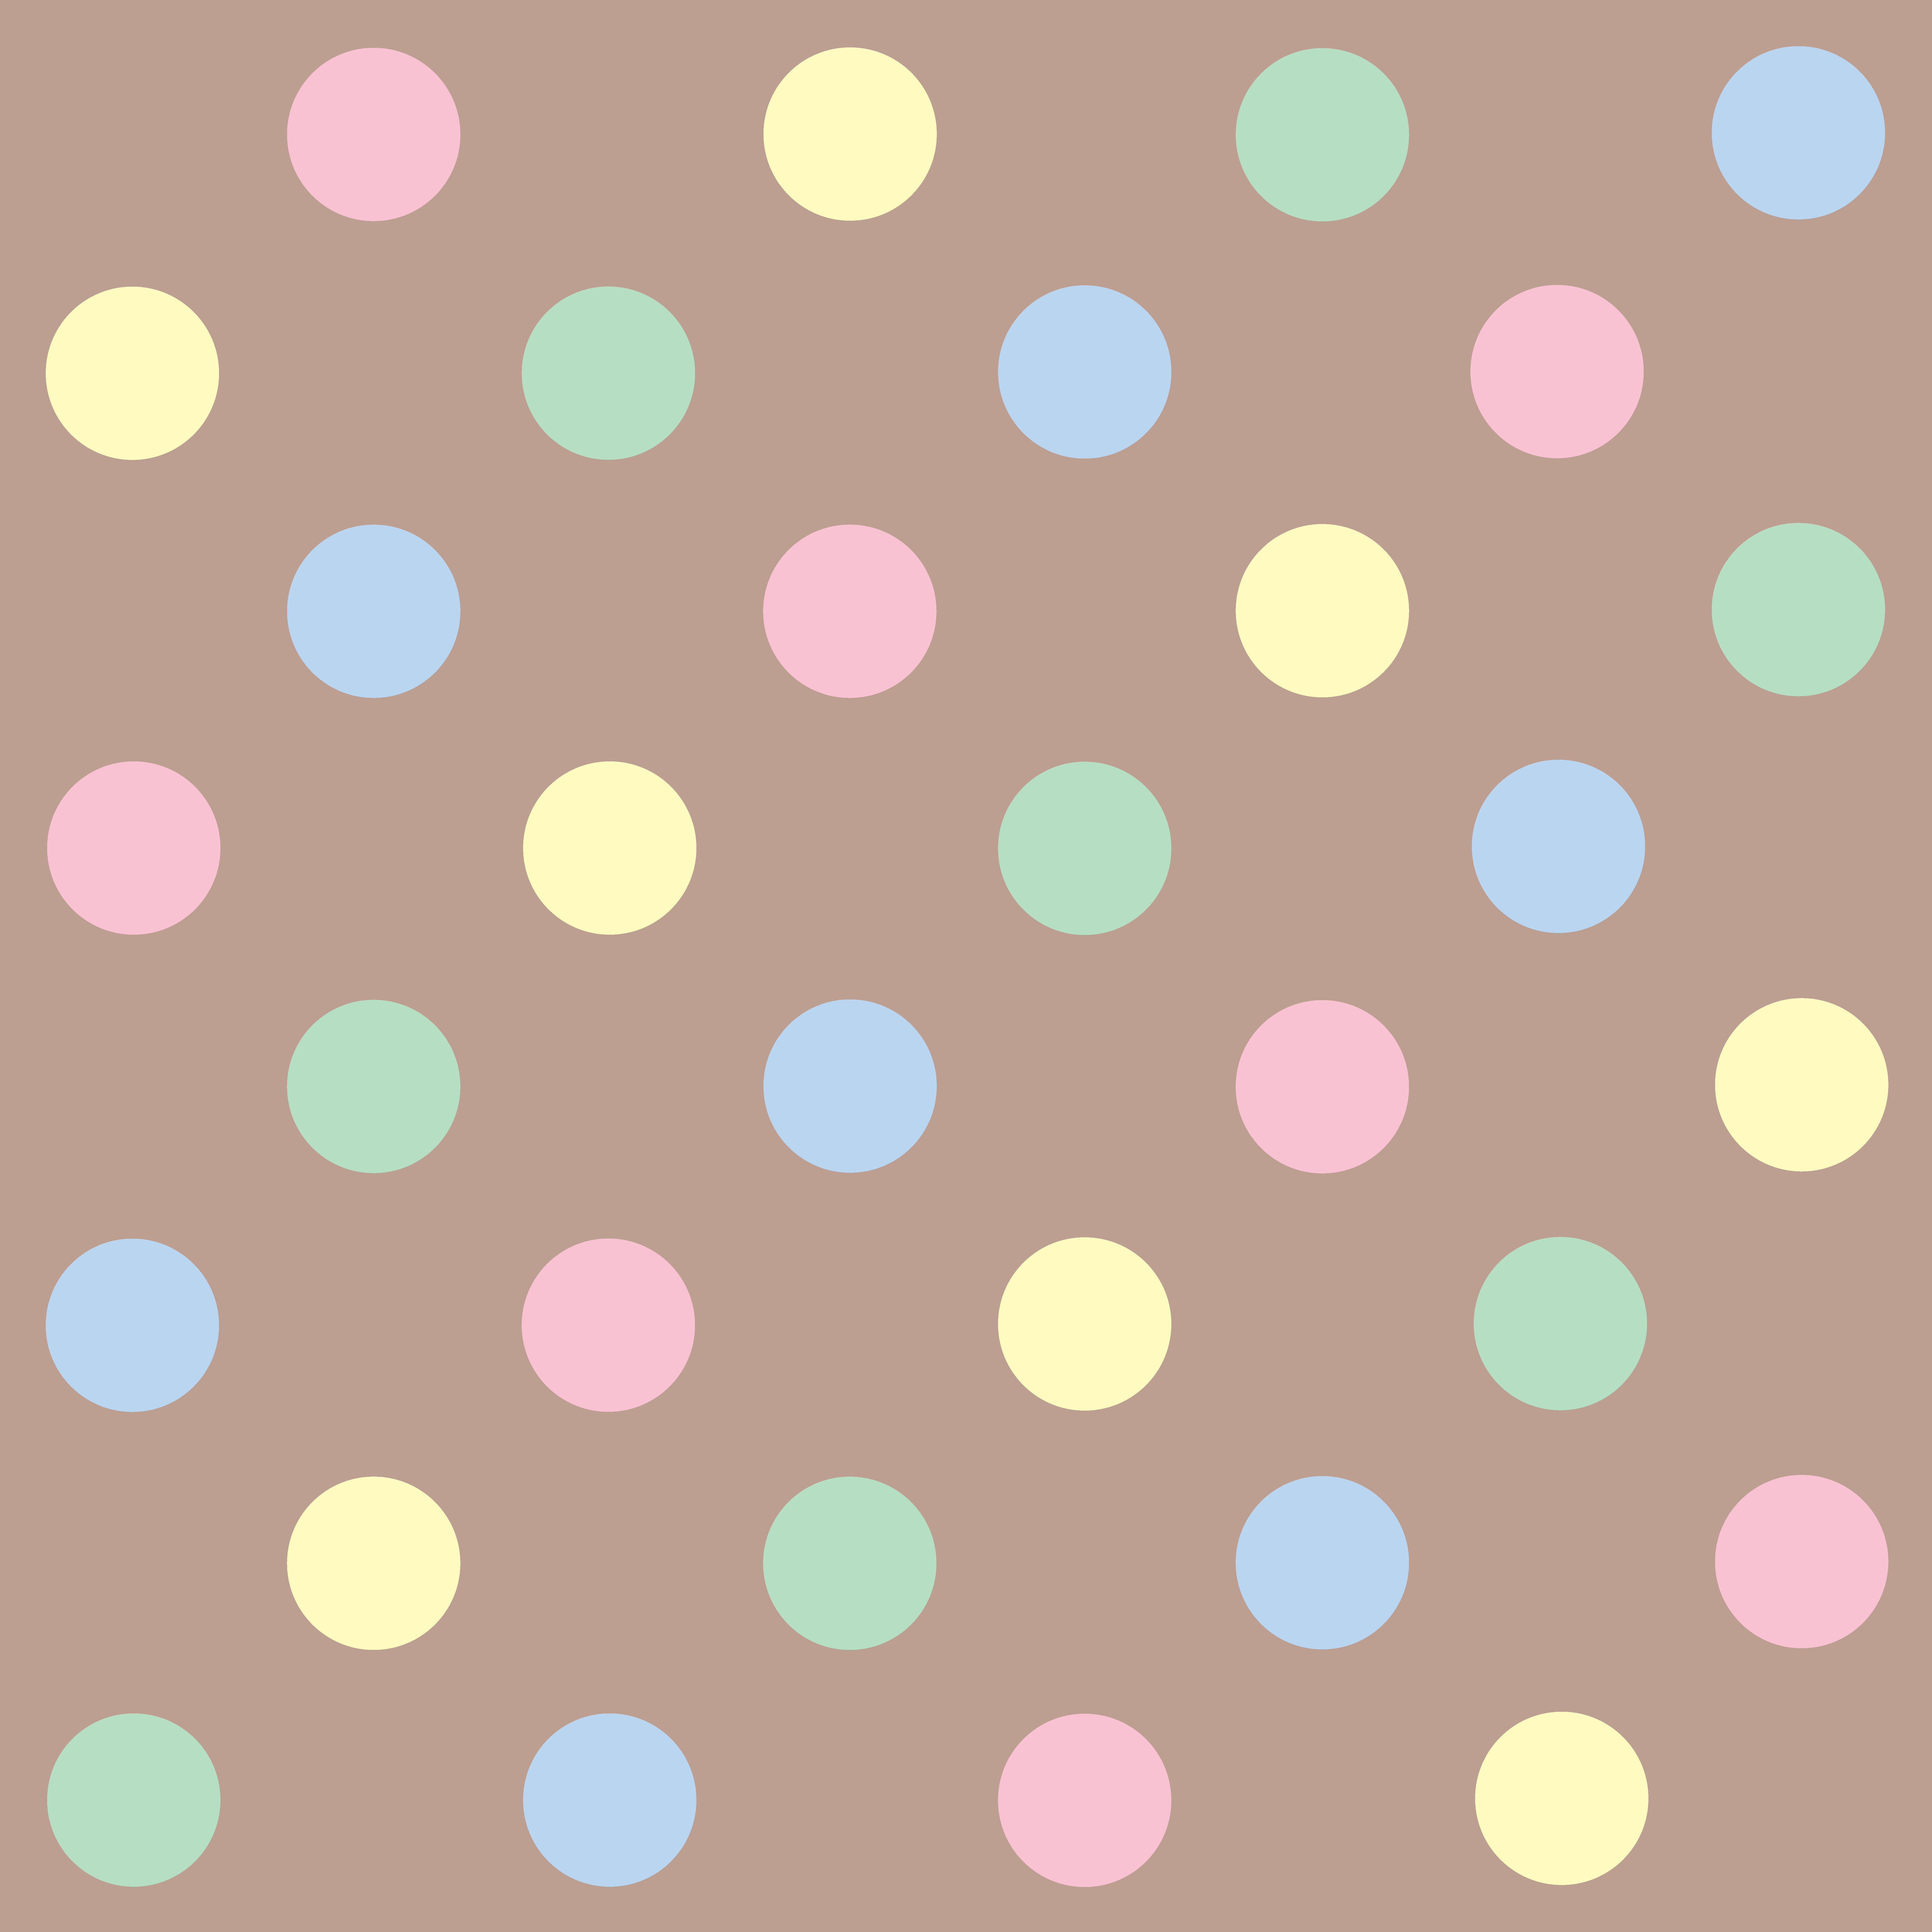 Pastel Green Polka Dot Background Image Pictures Becuo